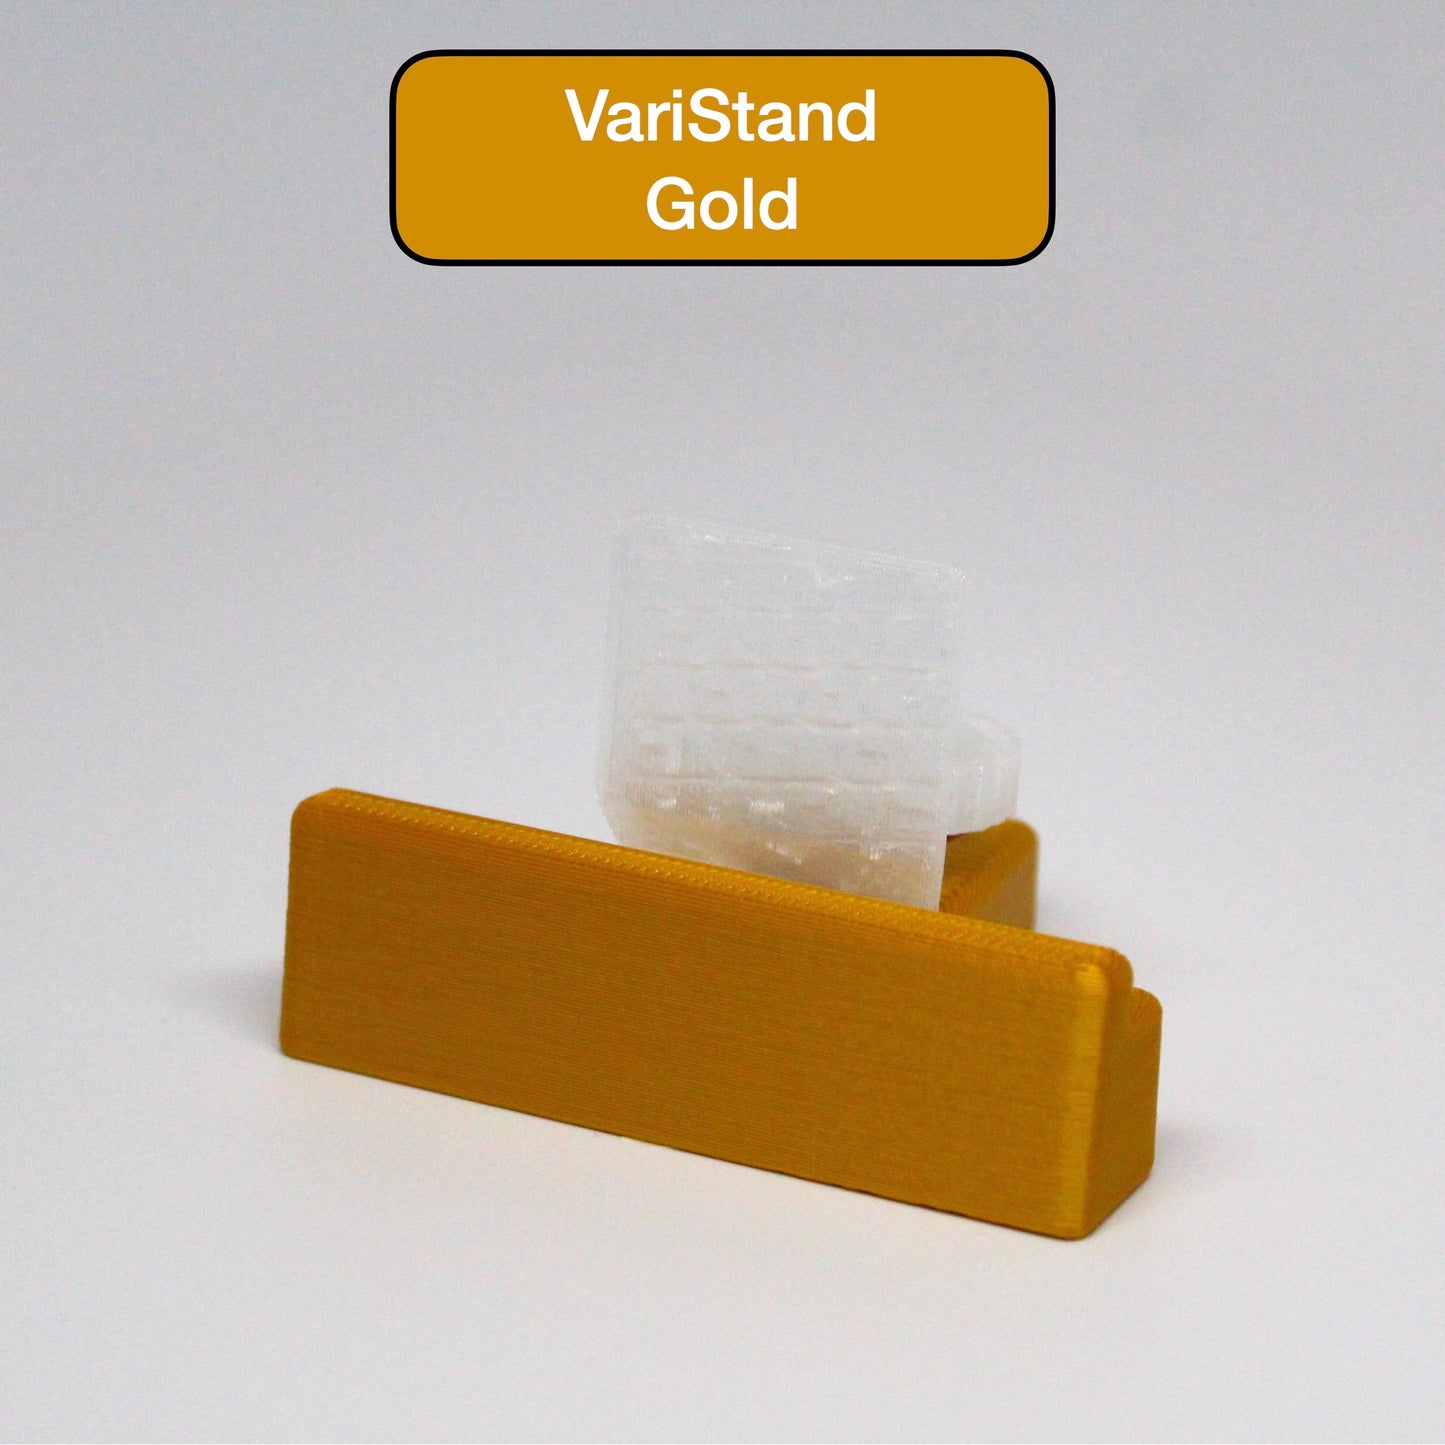 The Adjustable VariStand - Gold